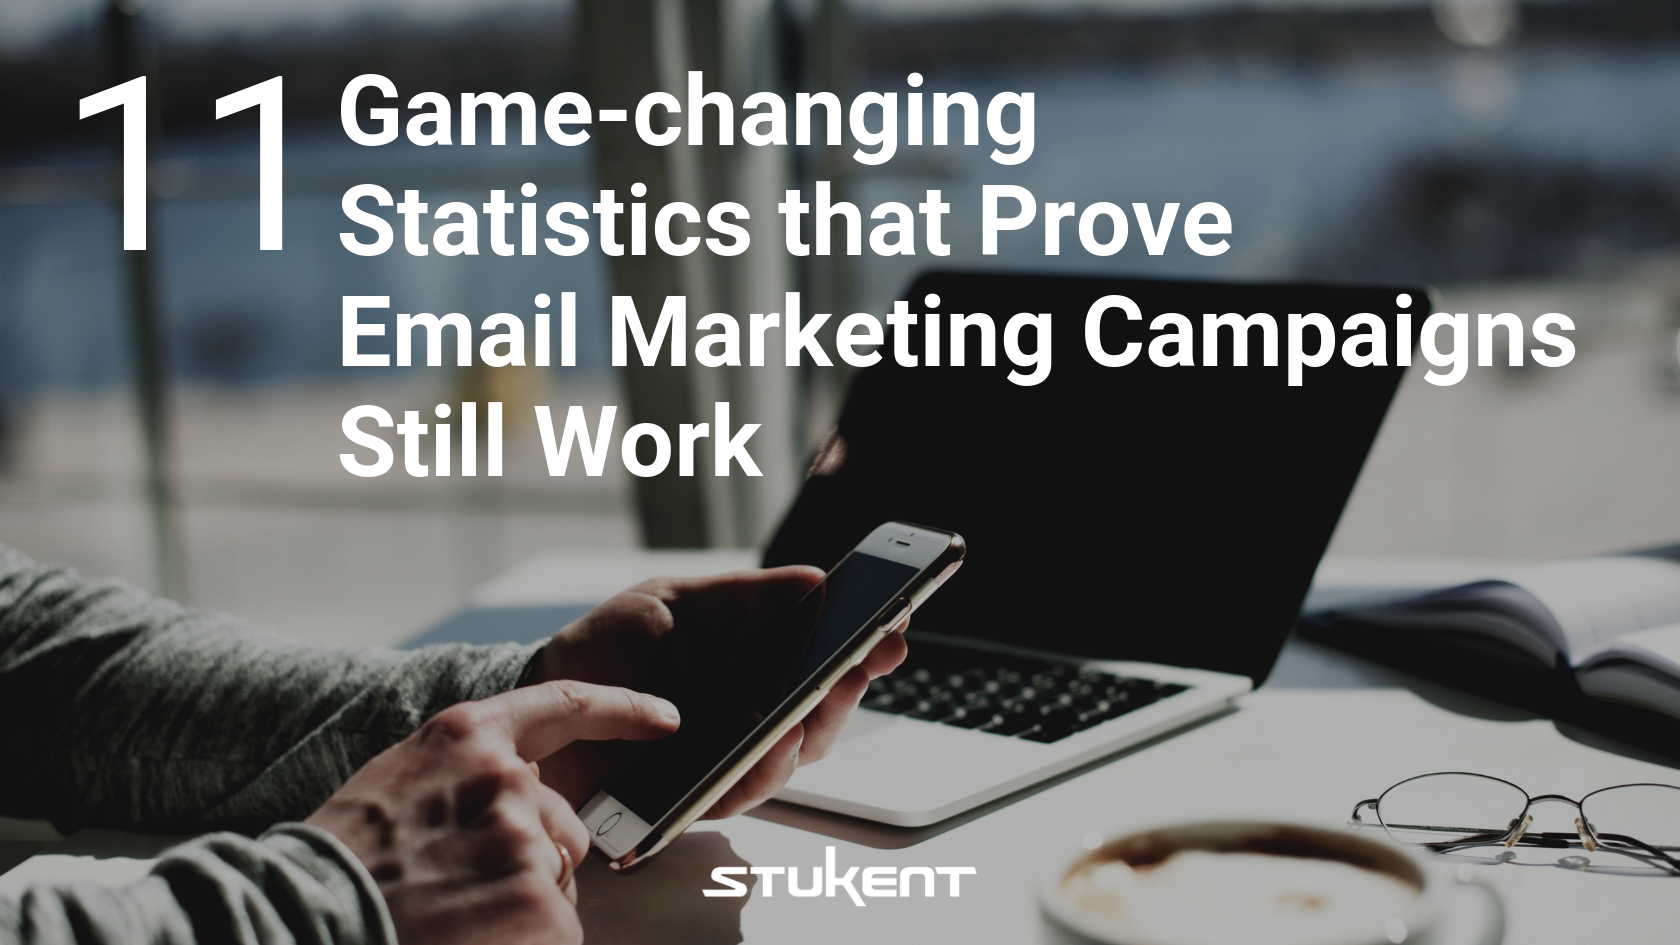 11 GAME-CHANGING STATISTICS THAT PROVE EMAIL MARKETING CAMPAIGNS STILL WORK